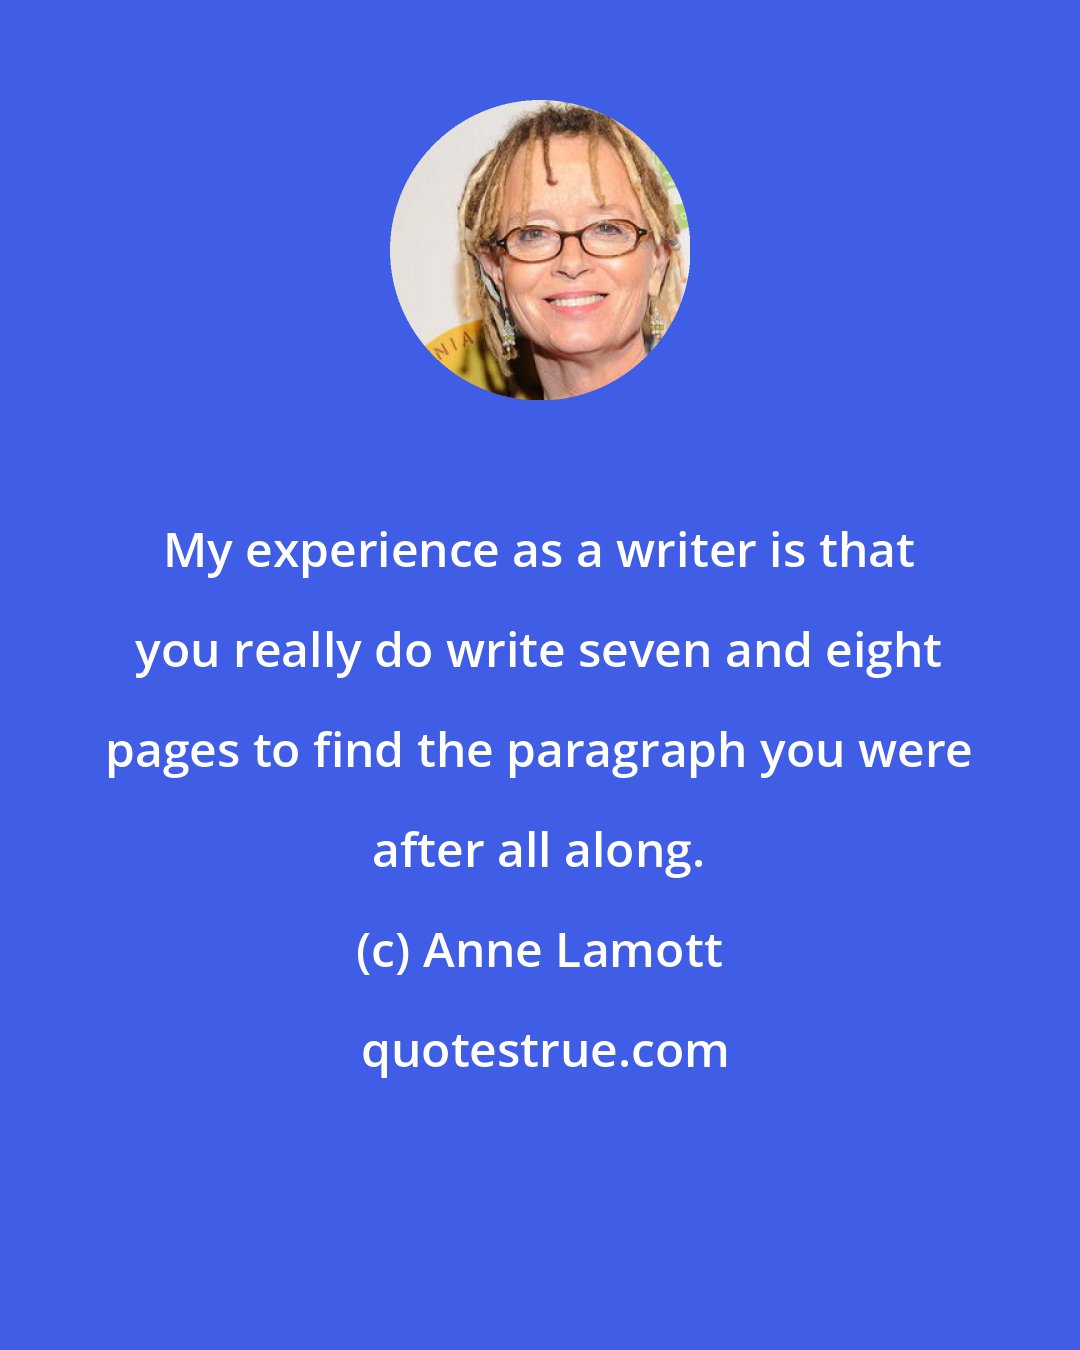 Anne Lamott: My experience as a writer is that you really do write seven and eight pages to find the paragraph you were after all along.